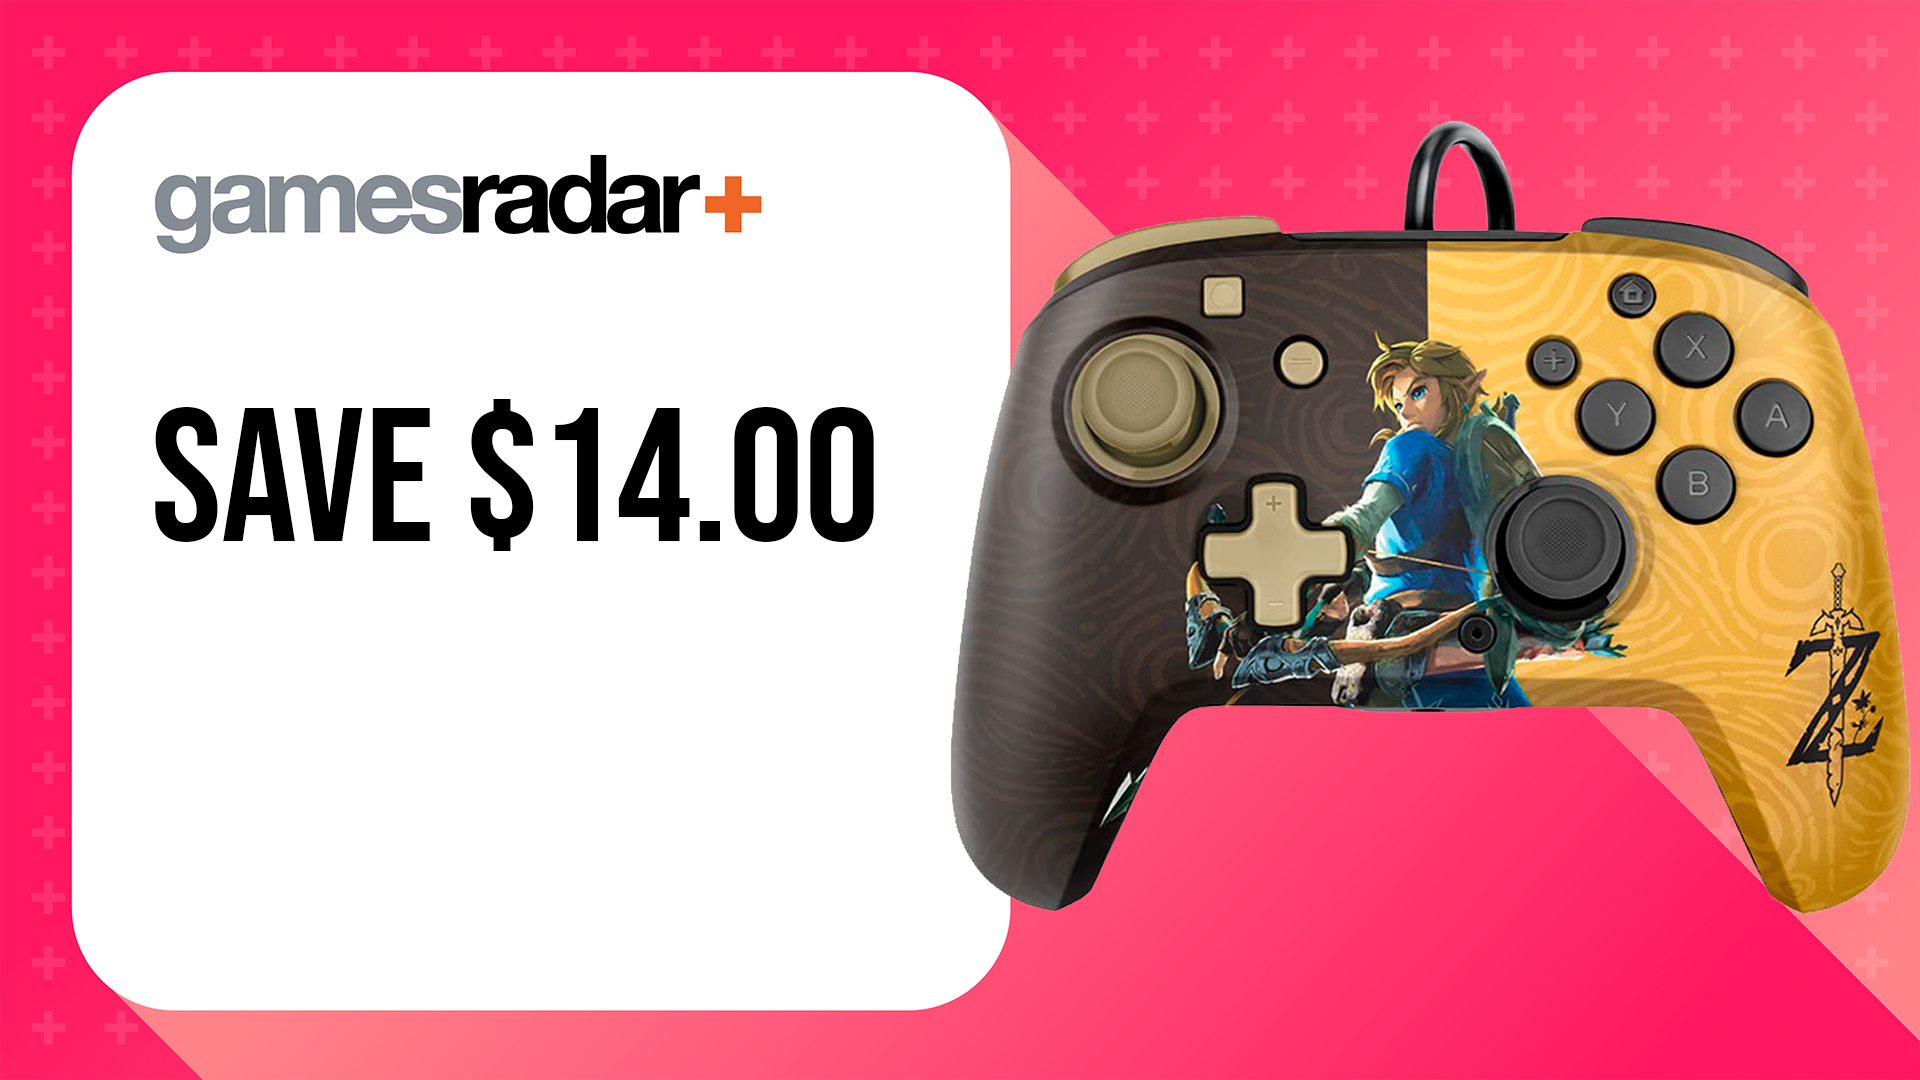 PDP Nintendo Switch controller - Breath of the Wild